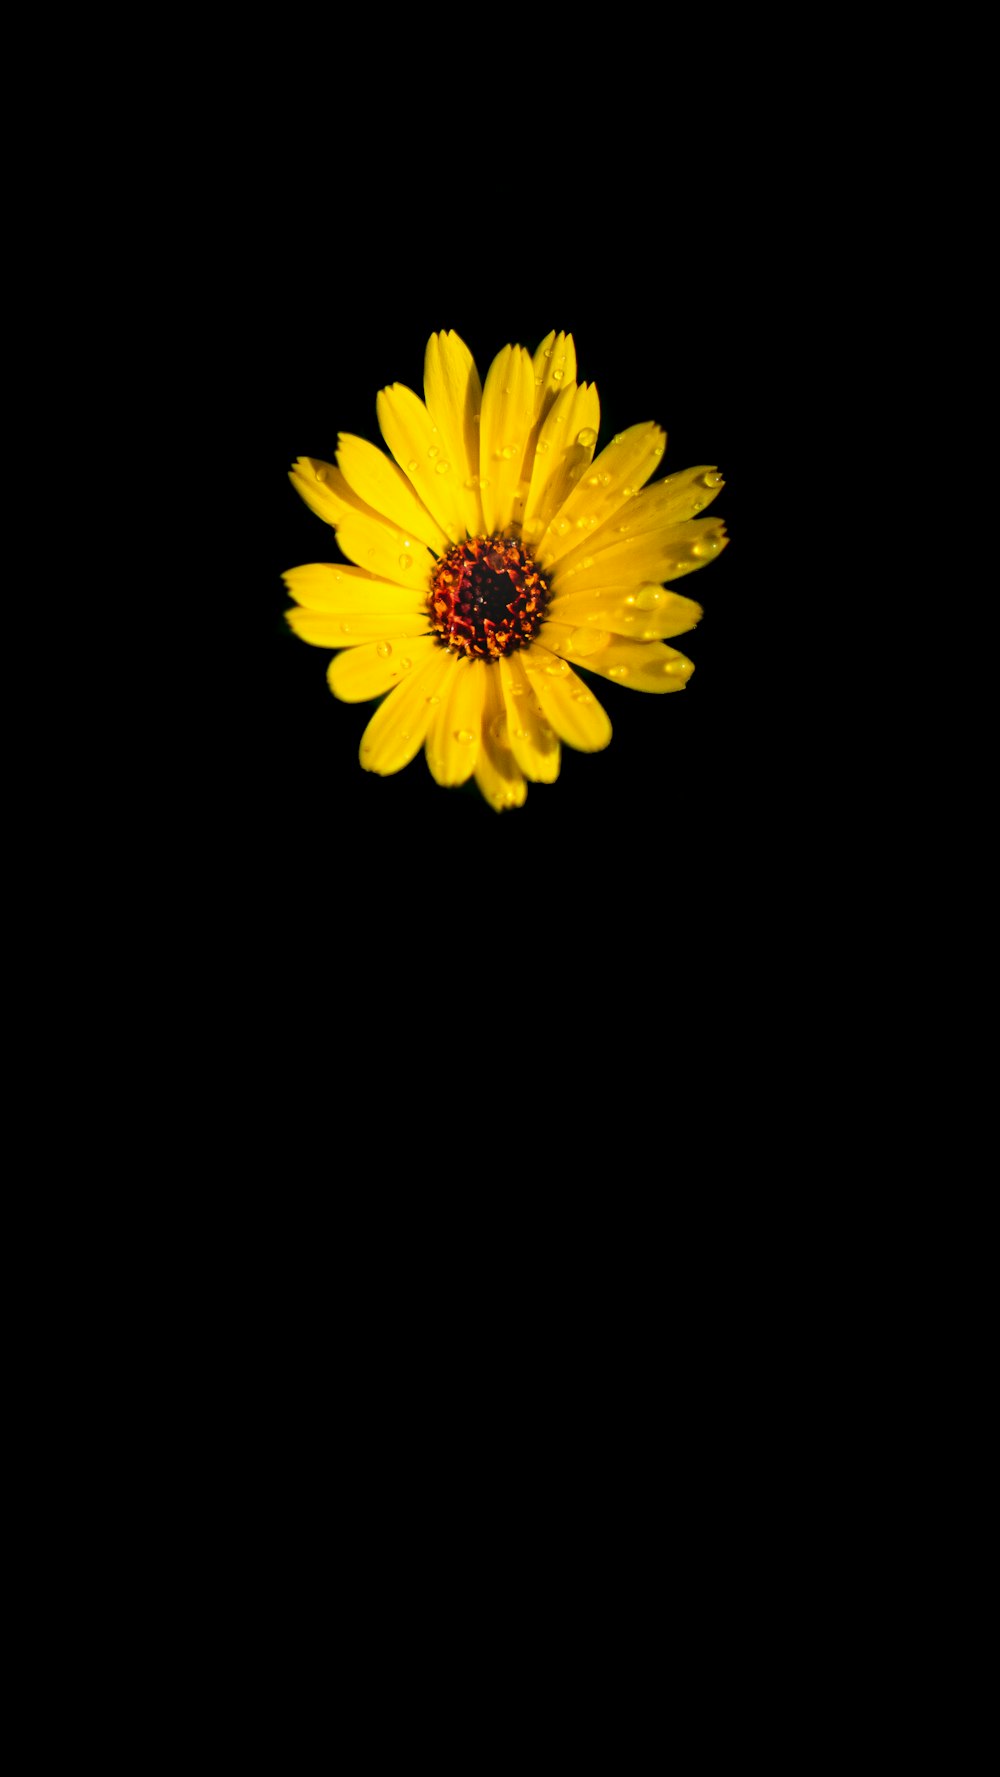 yellow flower with black background photo – Free Wallpaper Image on Unsplash